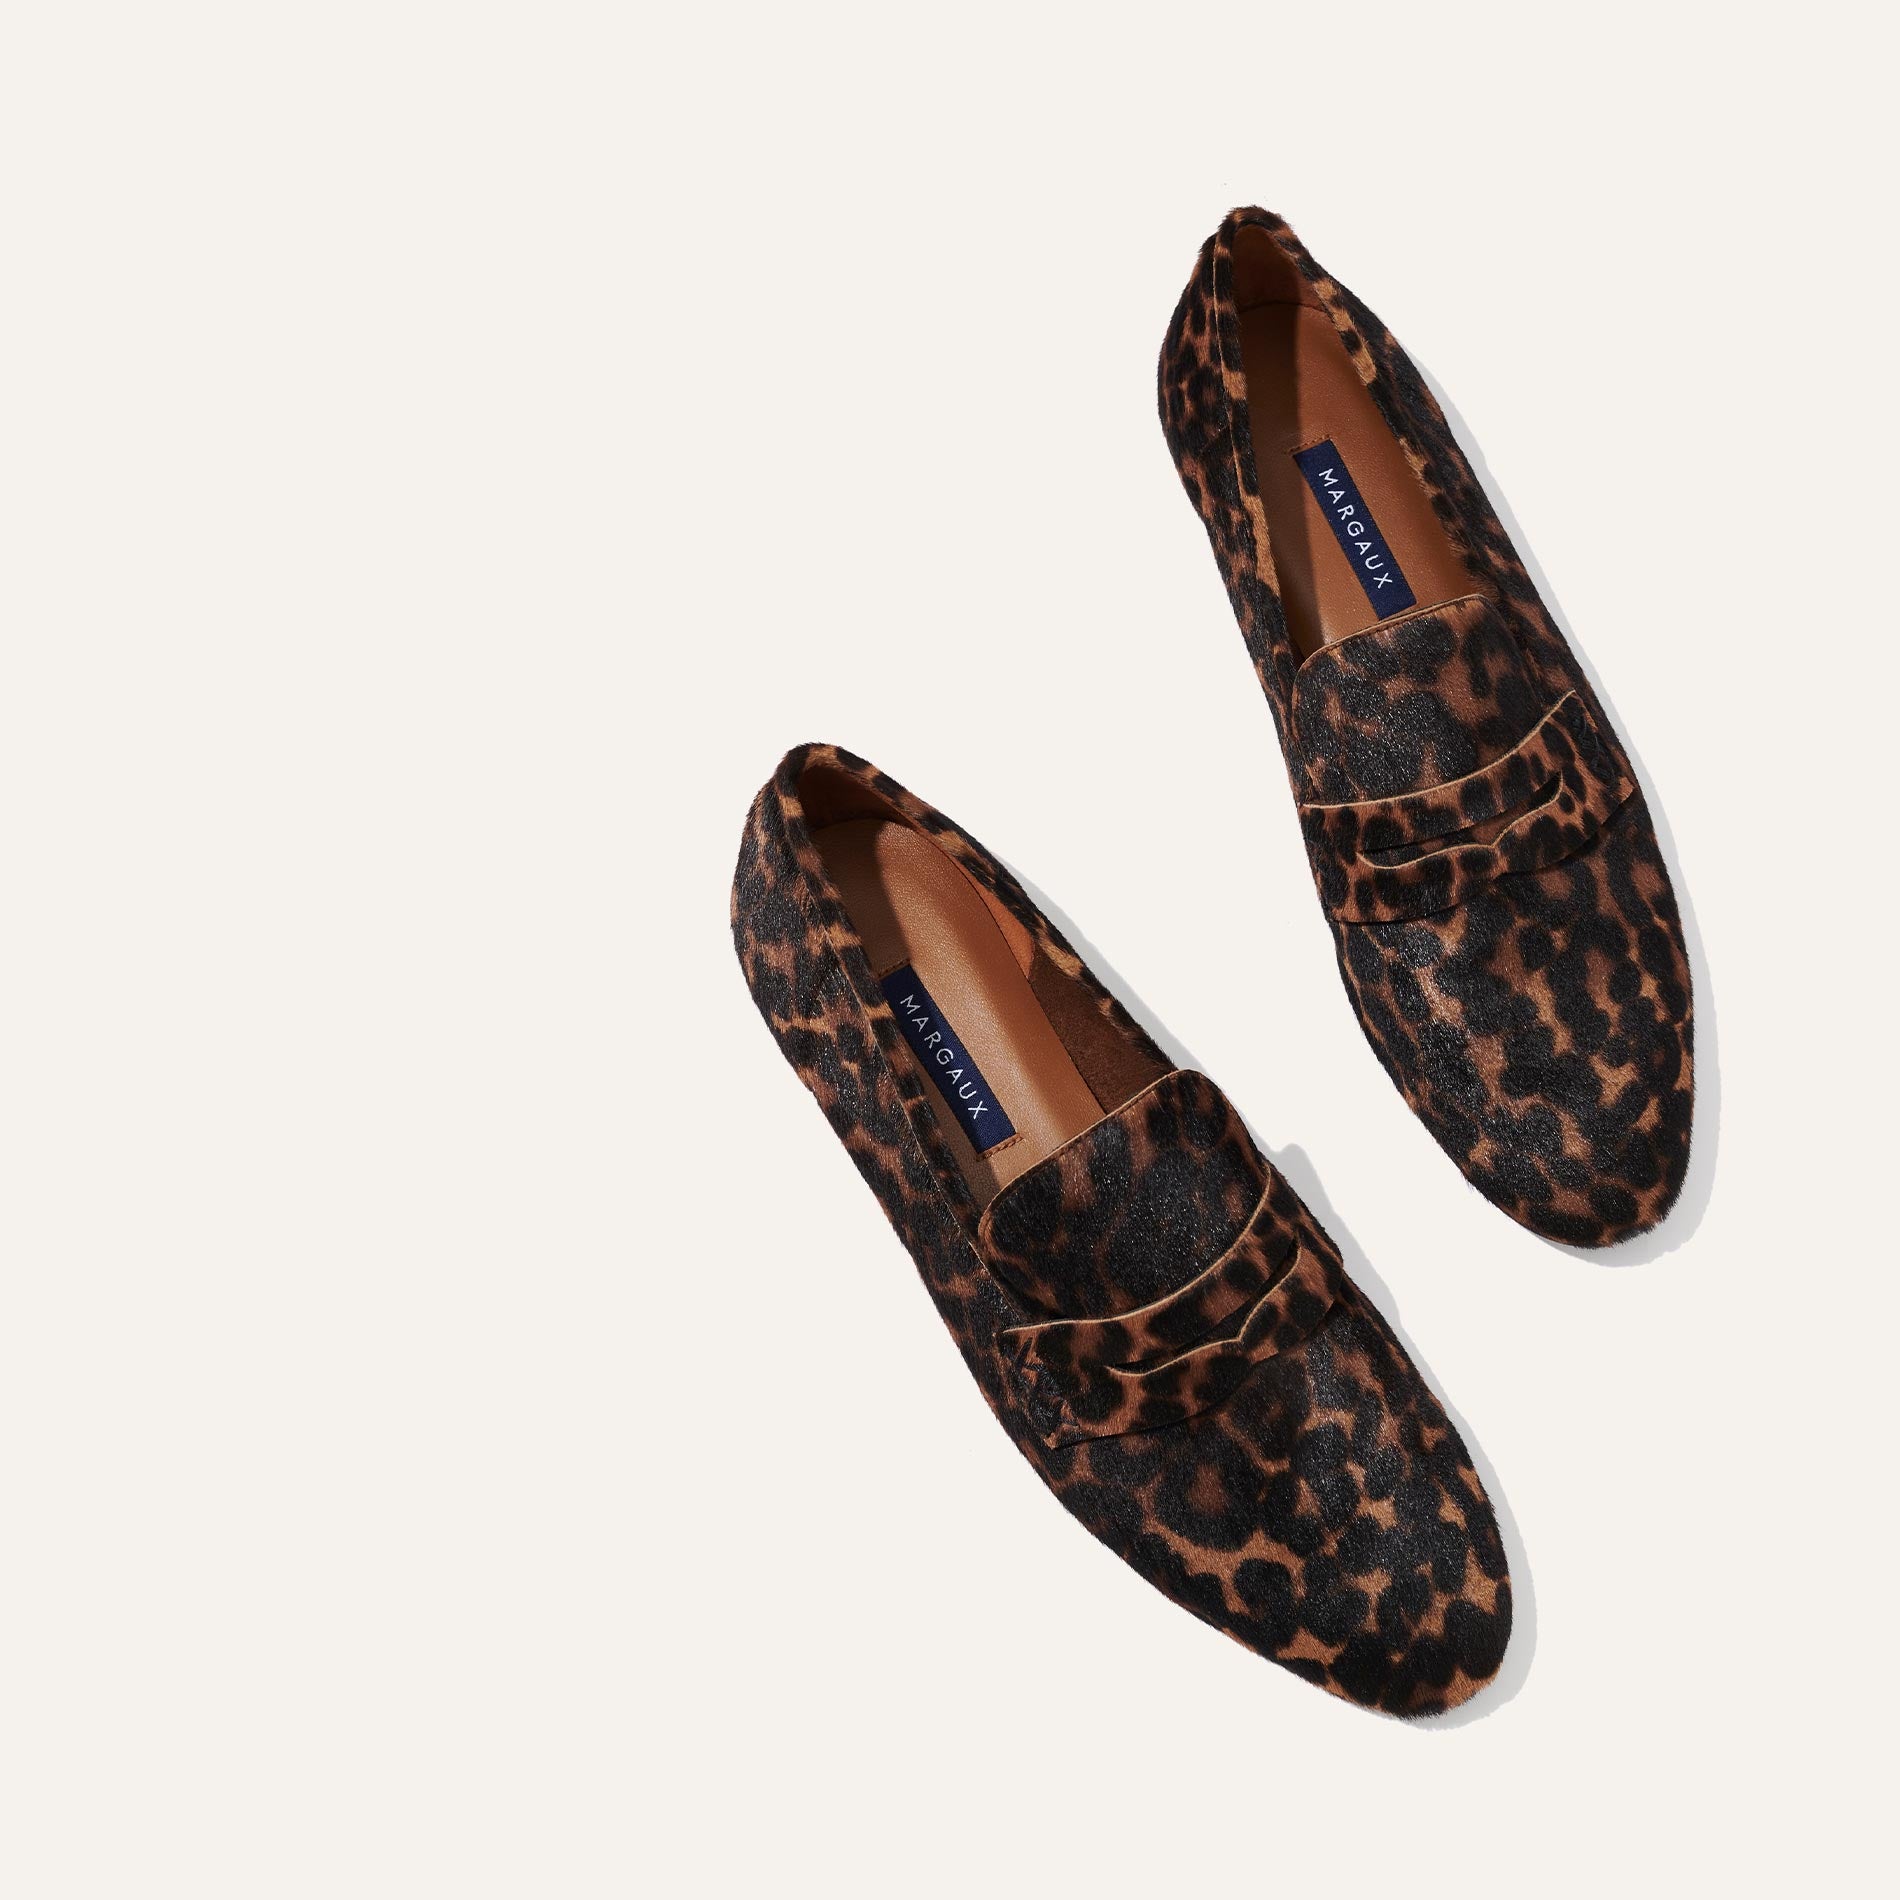 Margaux's classic and comfortable Penny loafer, made in Spain from soft, leopard-print Italian haircalf